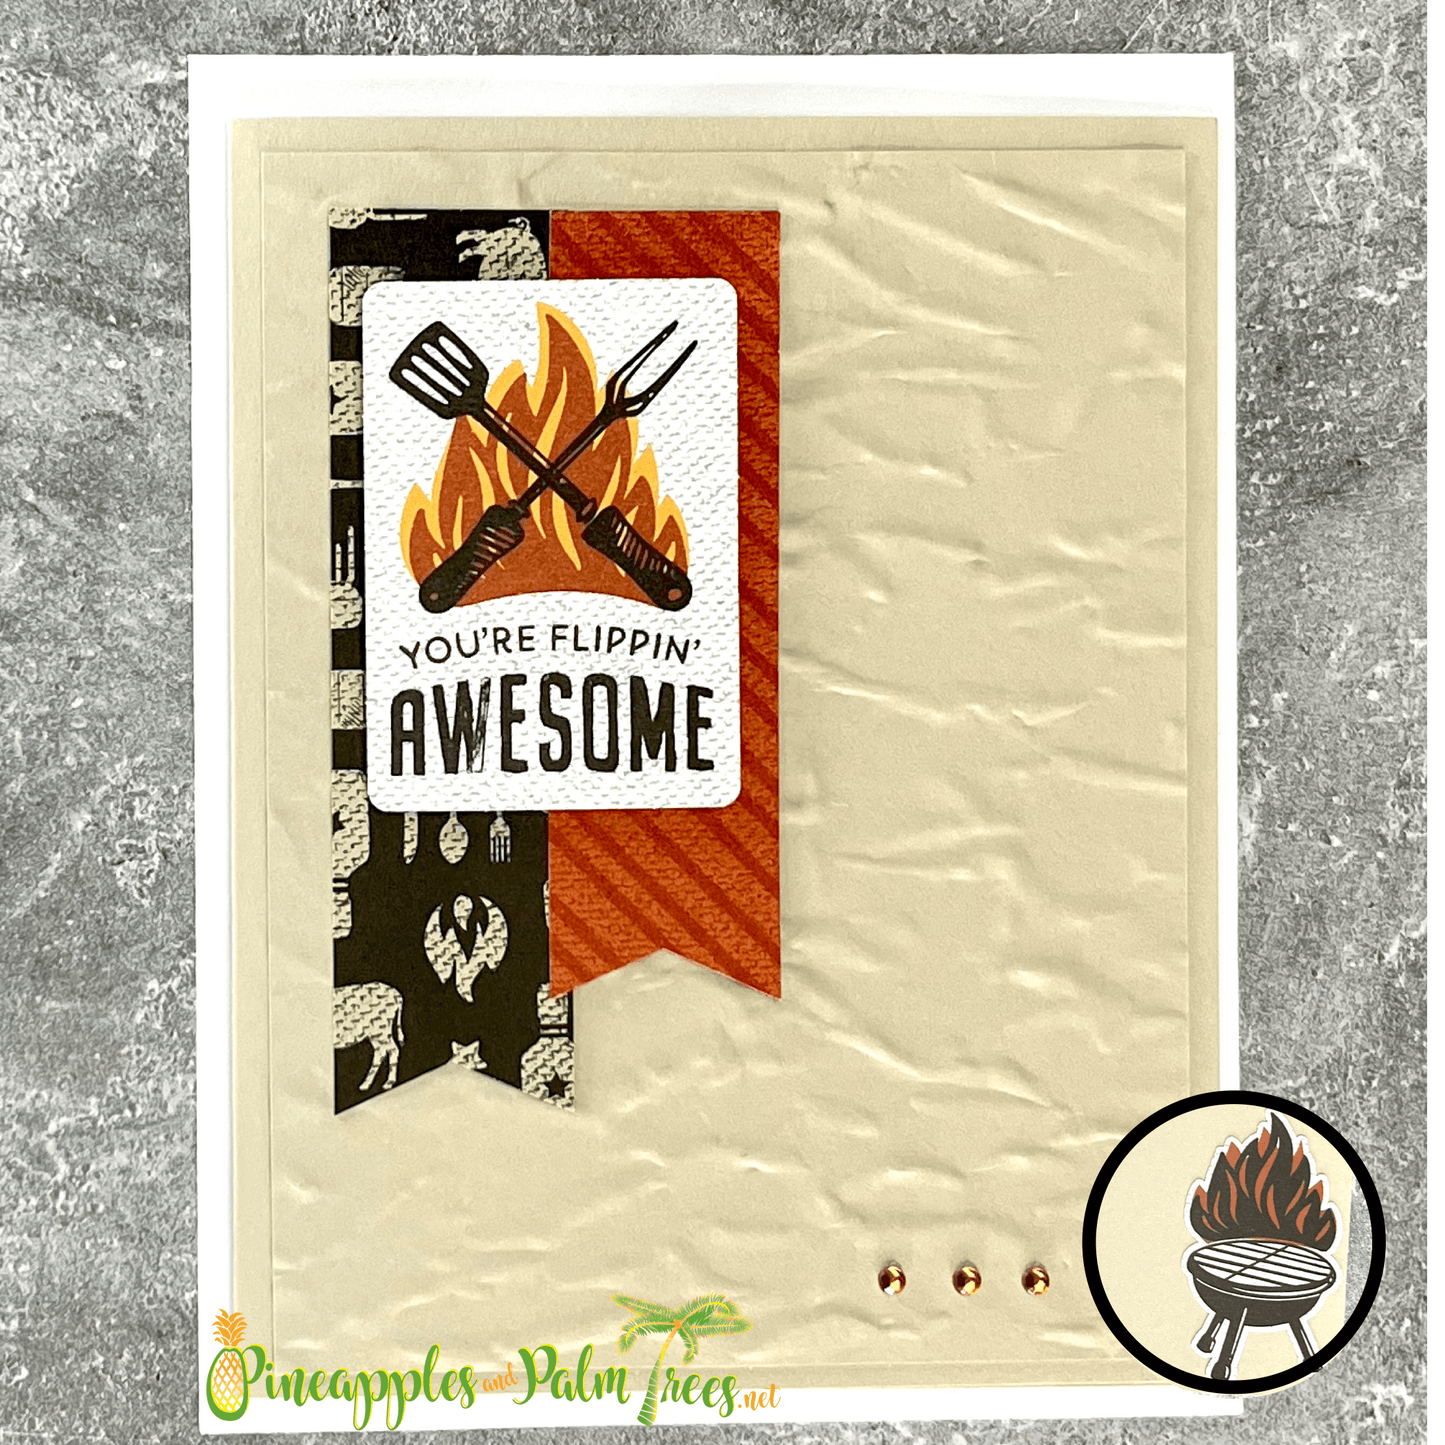 Greeting Card: You're Flippin' Awesome - bbq